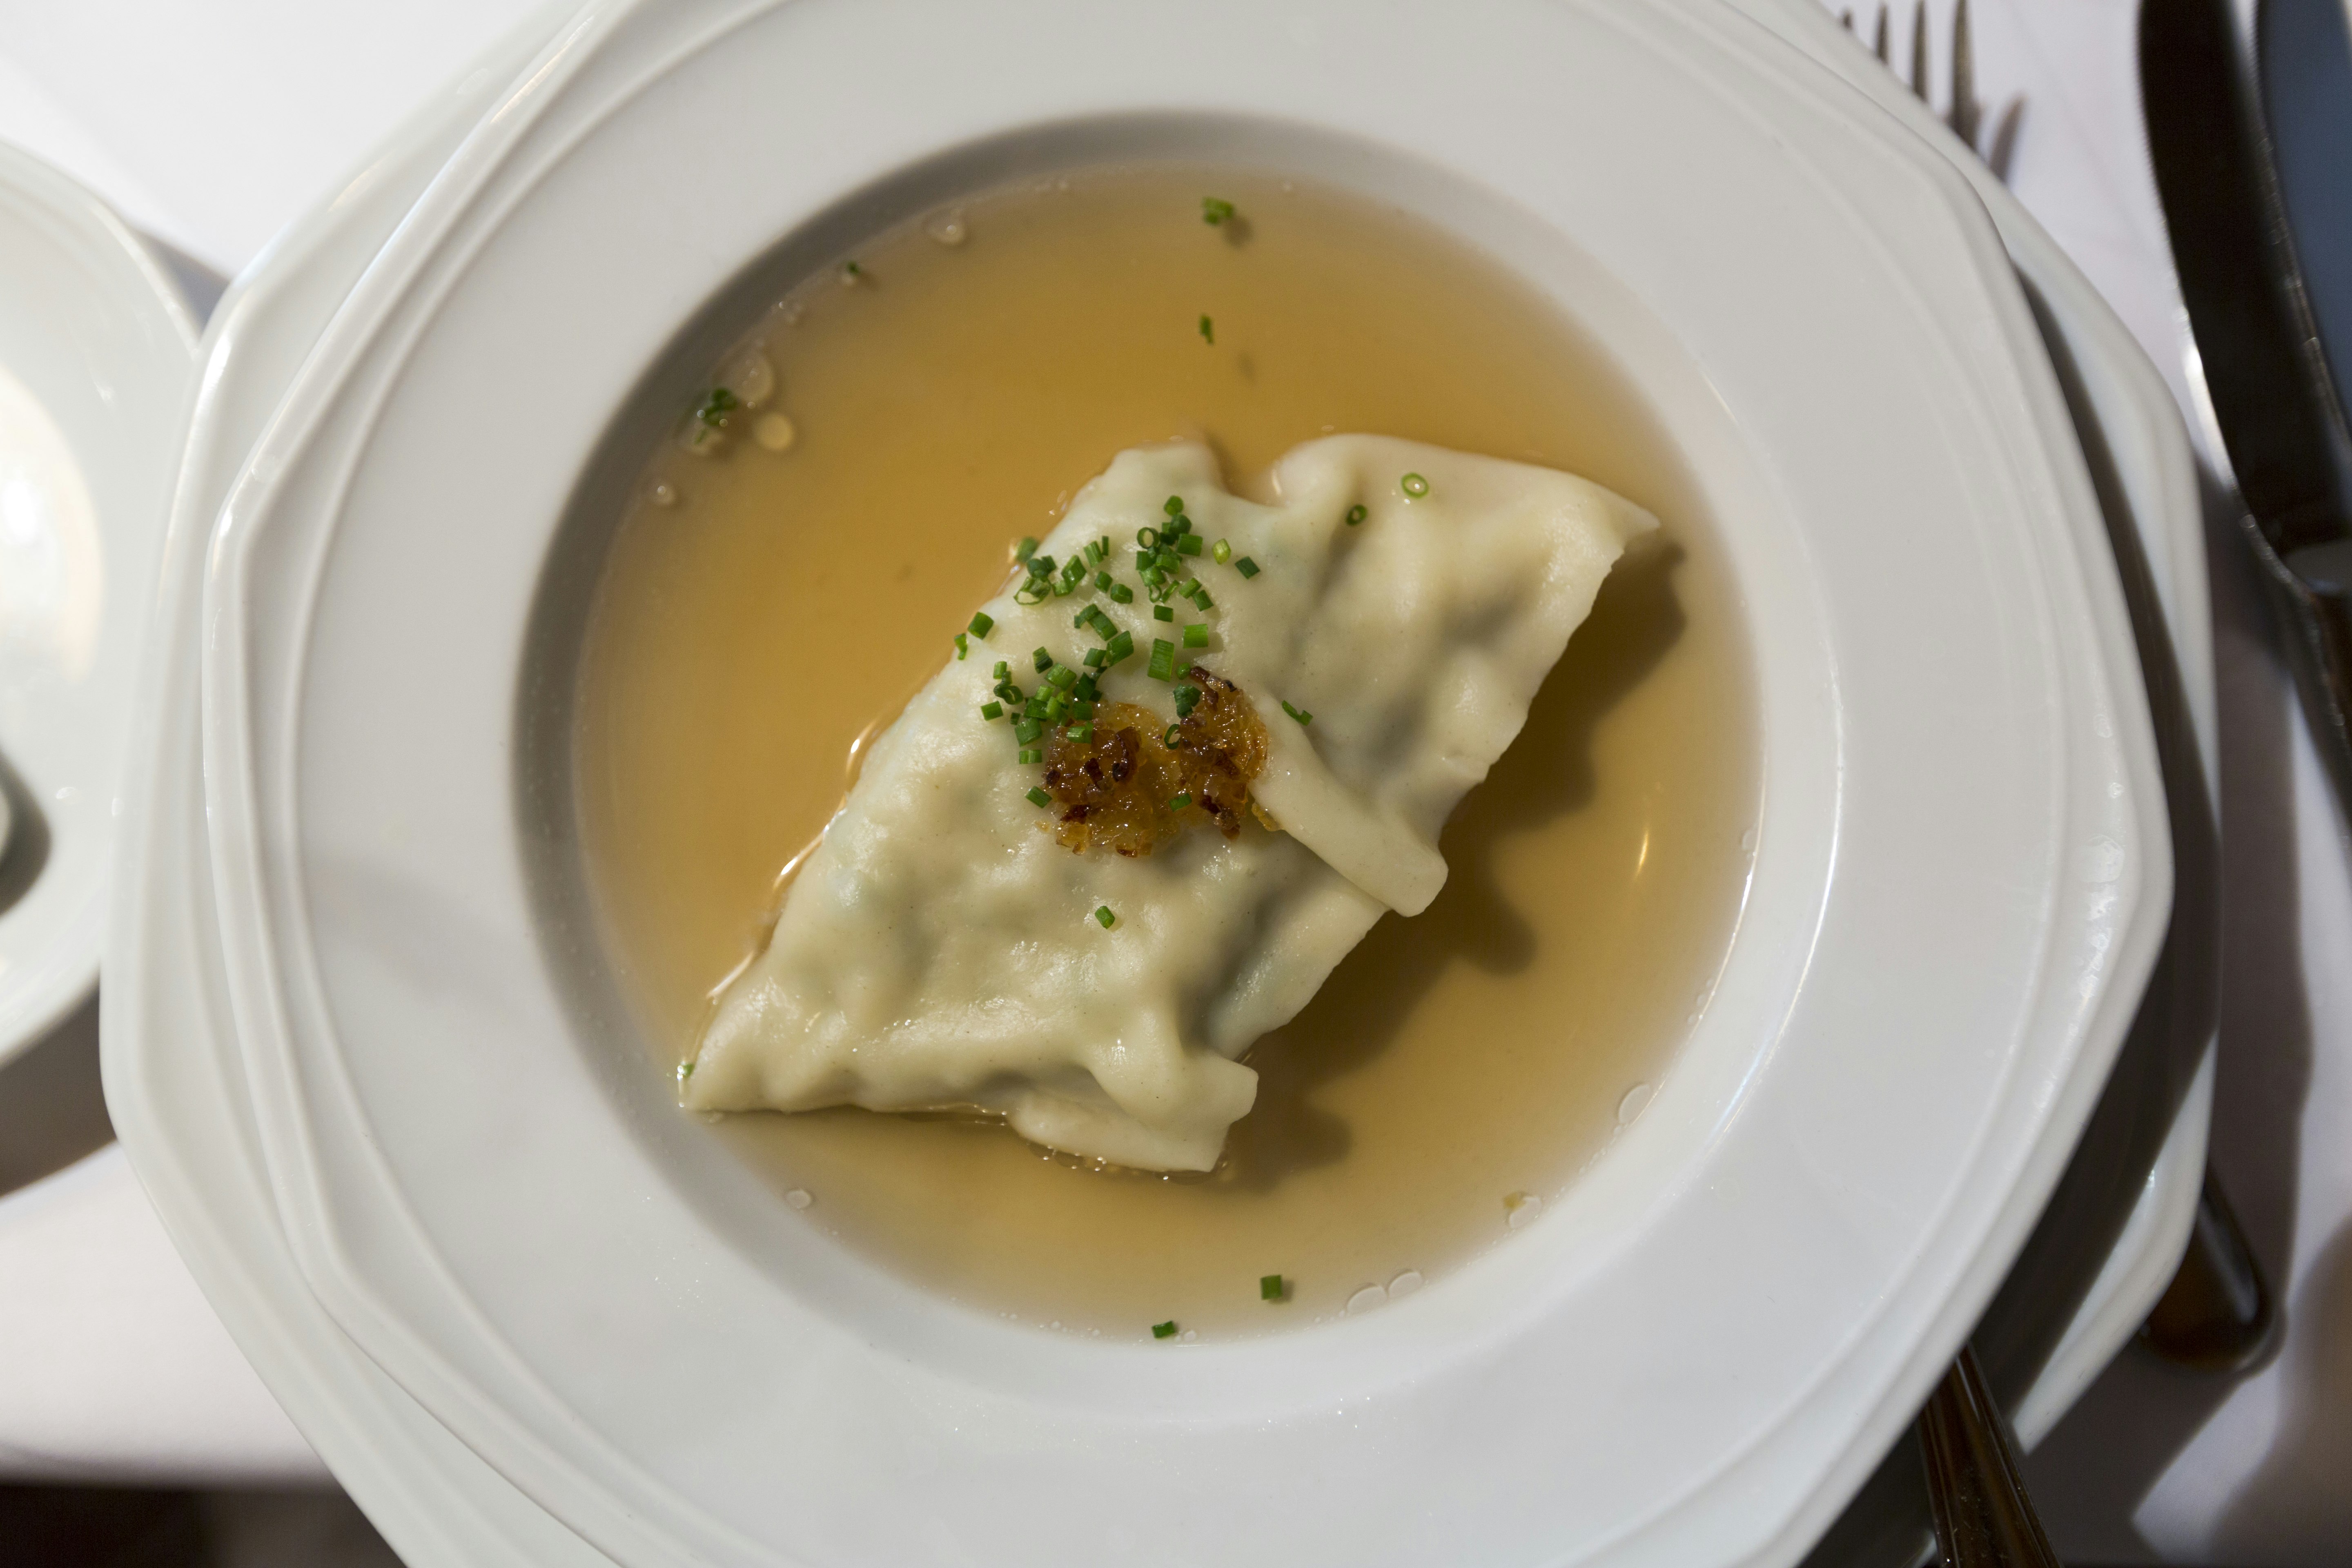 A pale dumpling topped with dark brown spices and bright green herbs sits in a pool of golden broth in a large white serving dish on a white table cloth.